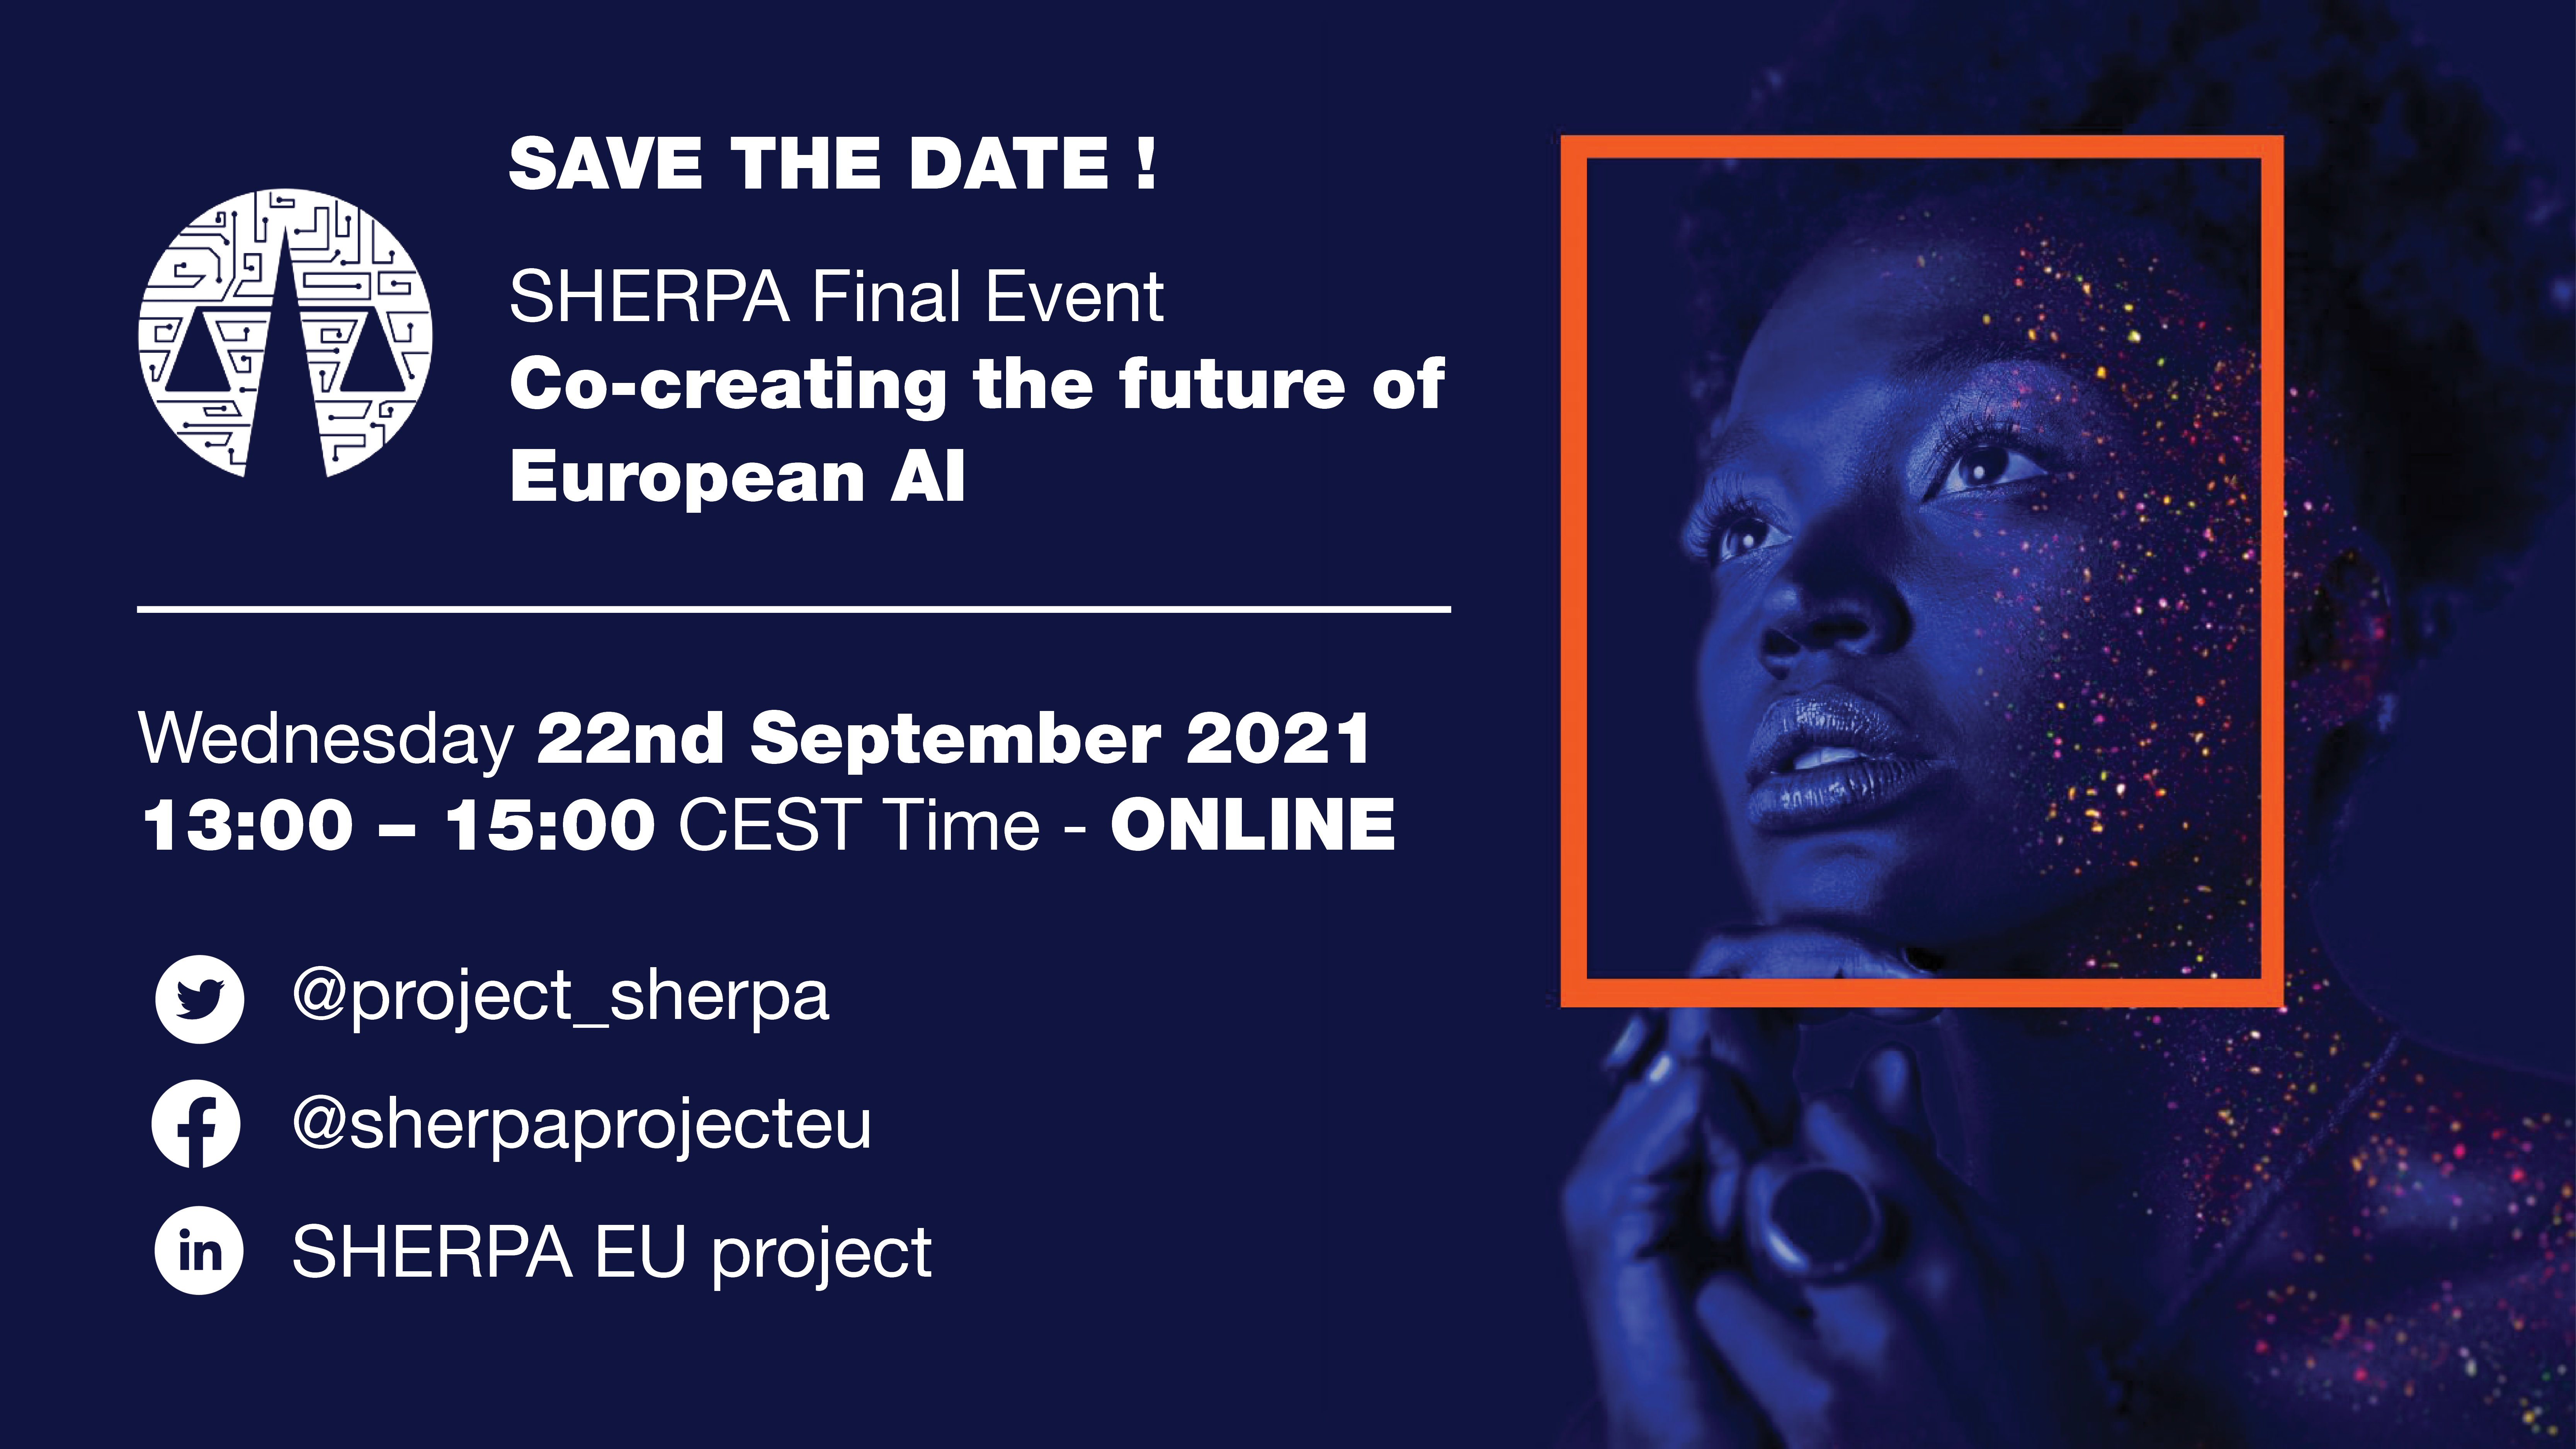 Join the SHERPA Final Event